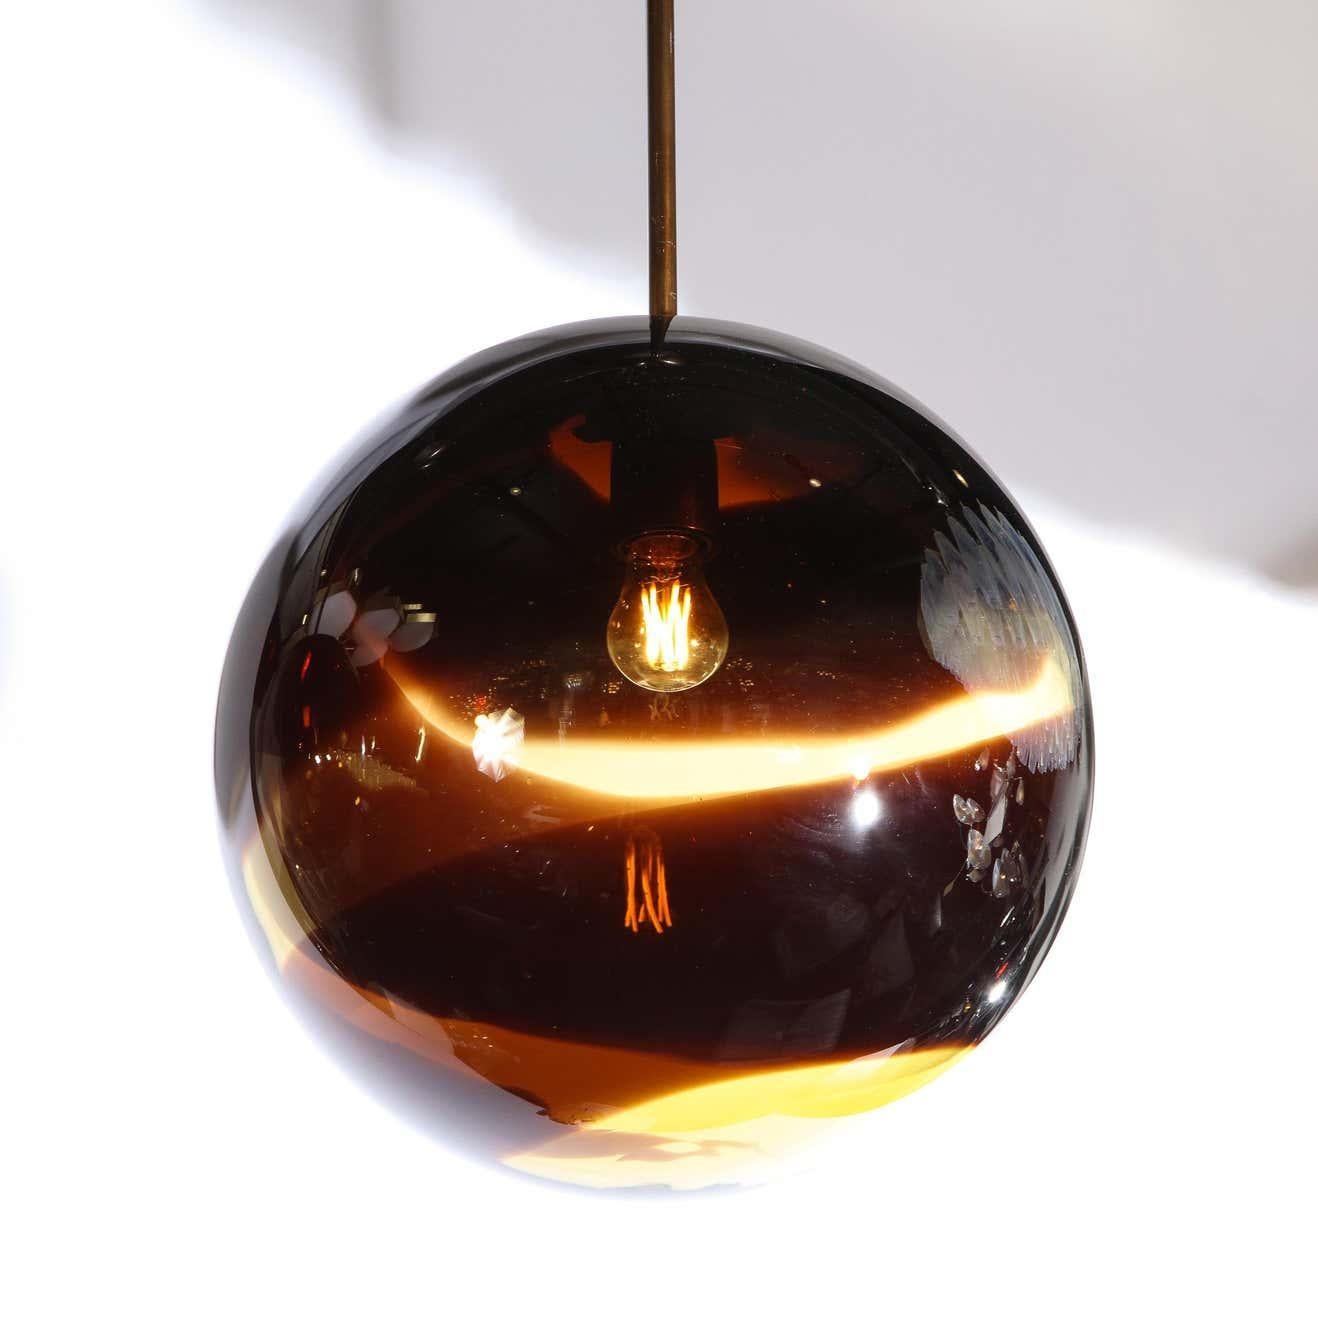 This elegant modernist pendant was handblown in Murano, Italy- the island off the coast of Venice renowned for centuries for its superlative glass production. The fixture offers a spherical body in smoked amber Murano glass with undulating chambord